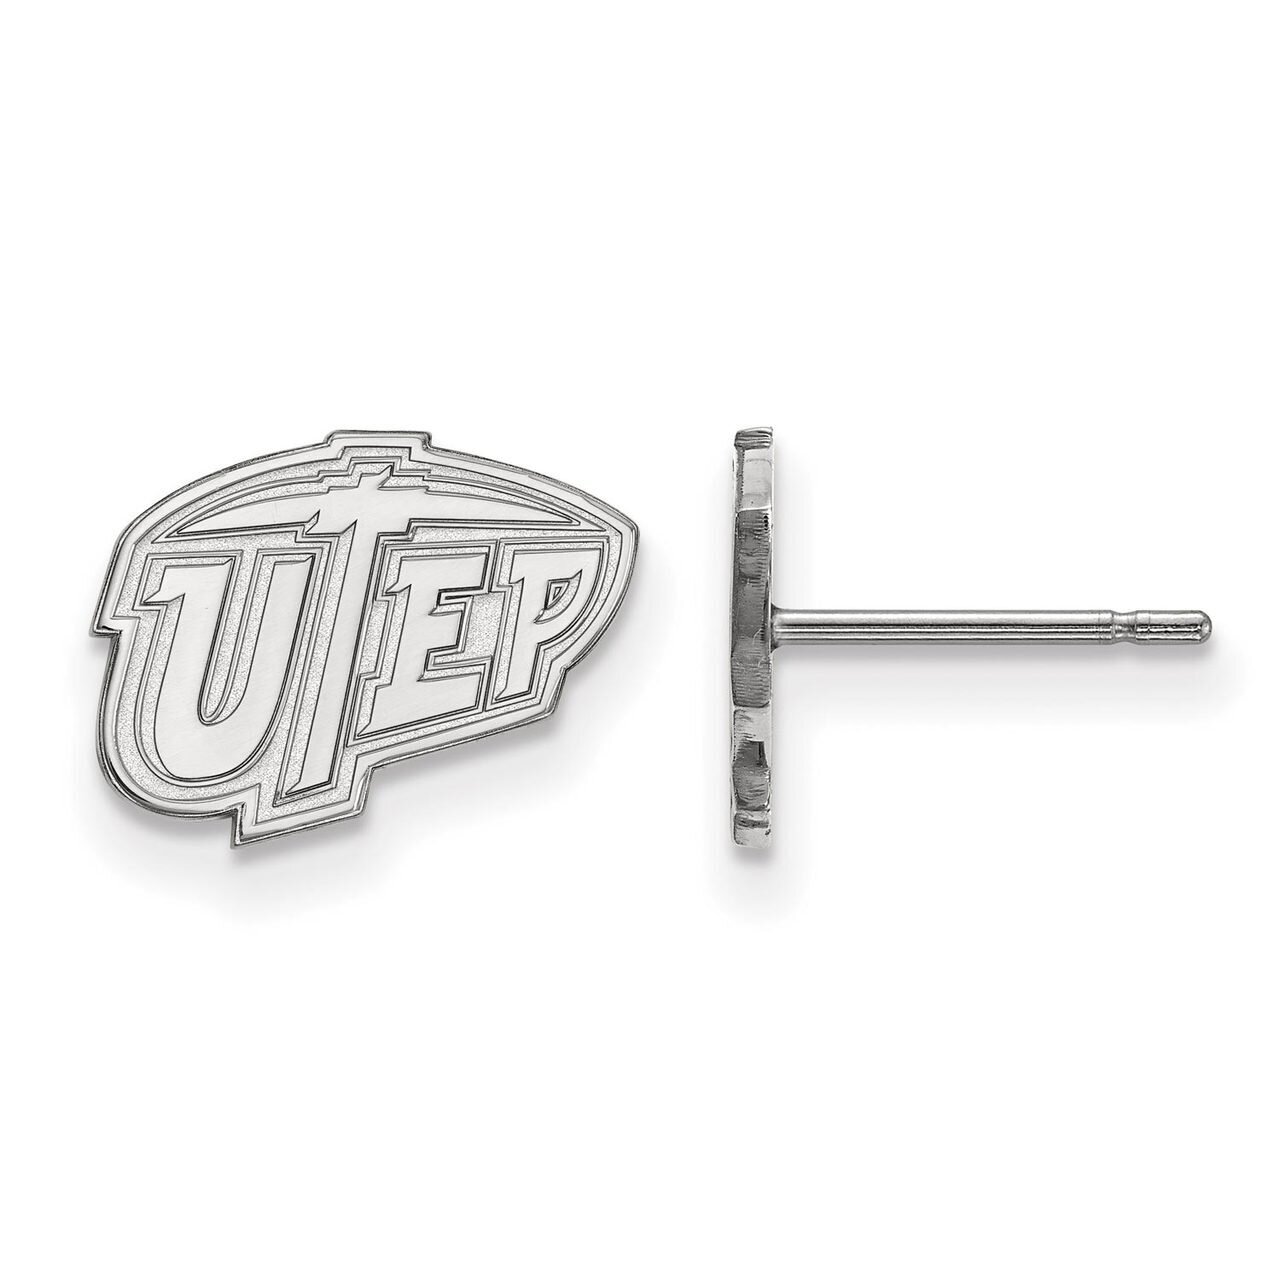 The University of Texas at El Paso Extra Small Post Earring Sterling Silver SS007UTE